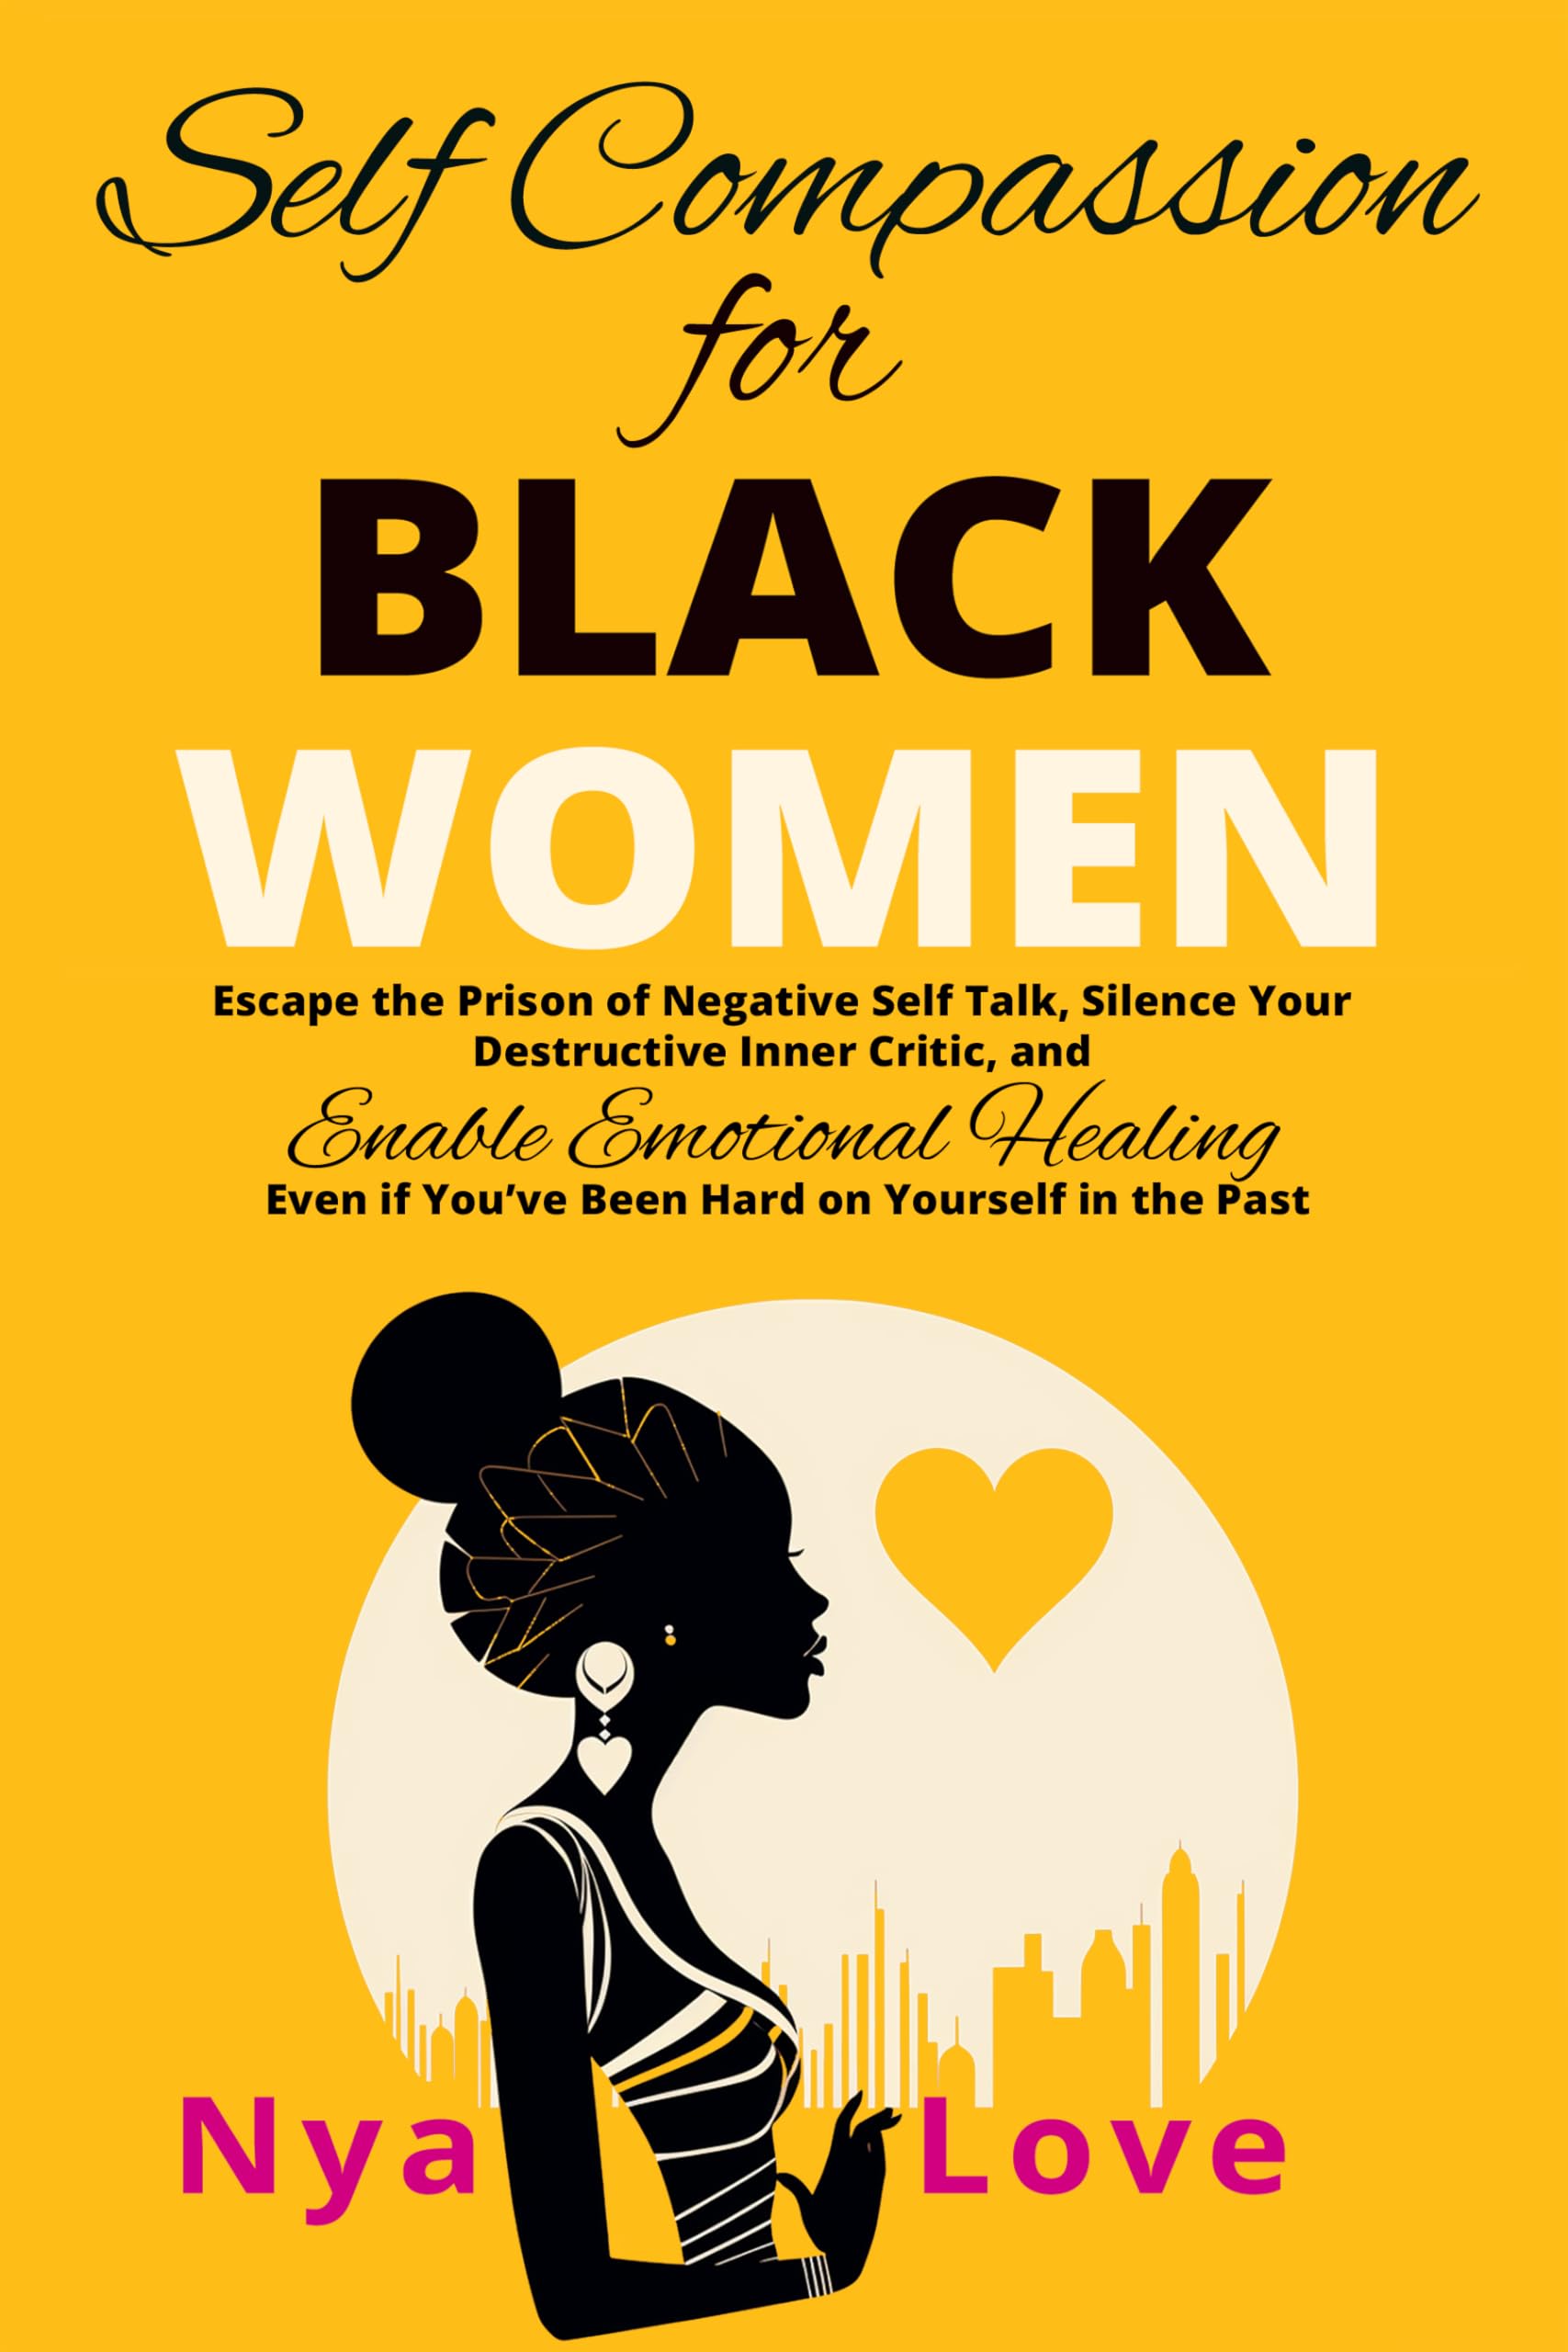 Self-Compassion for Black Women: Escape the Prison of Negative Self Talk, Silence Your Destructive Inner Critic, and Enable Emotional Healing Even If You’ve ... In the Past (Self-Help for Black Women)